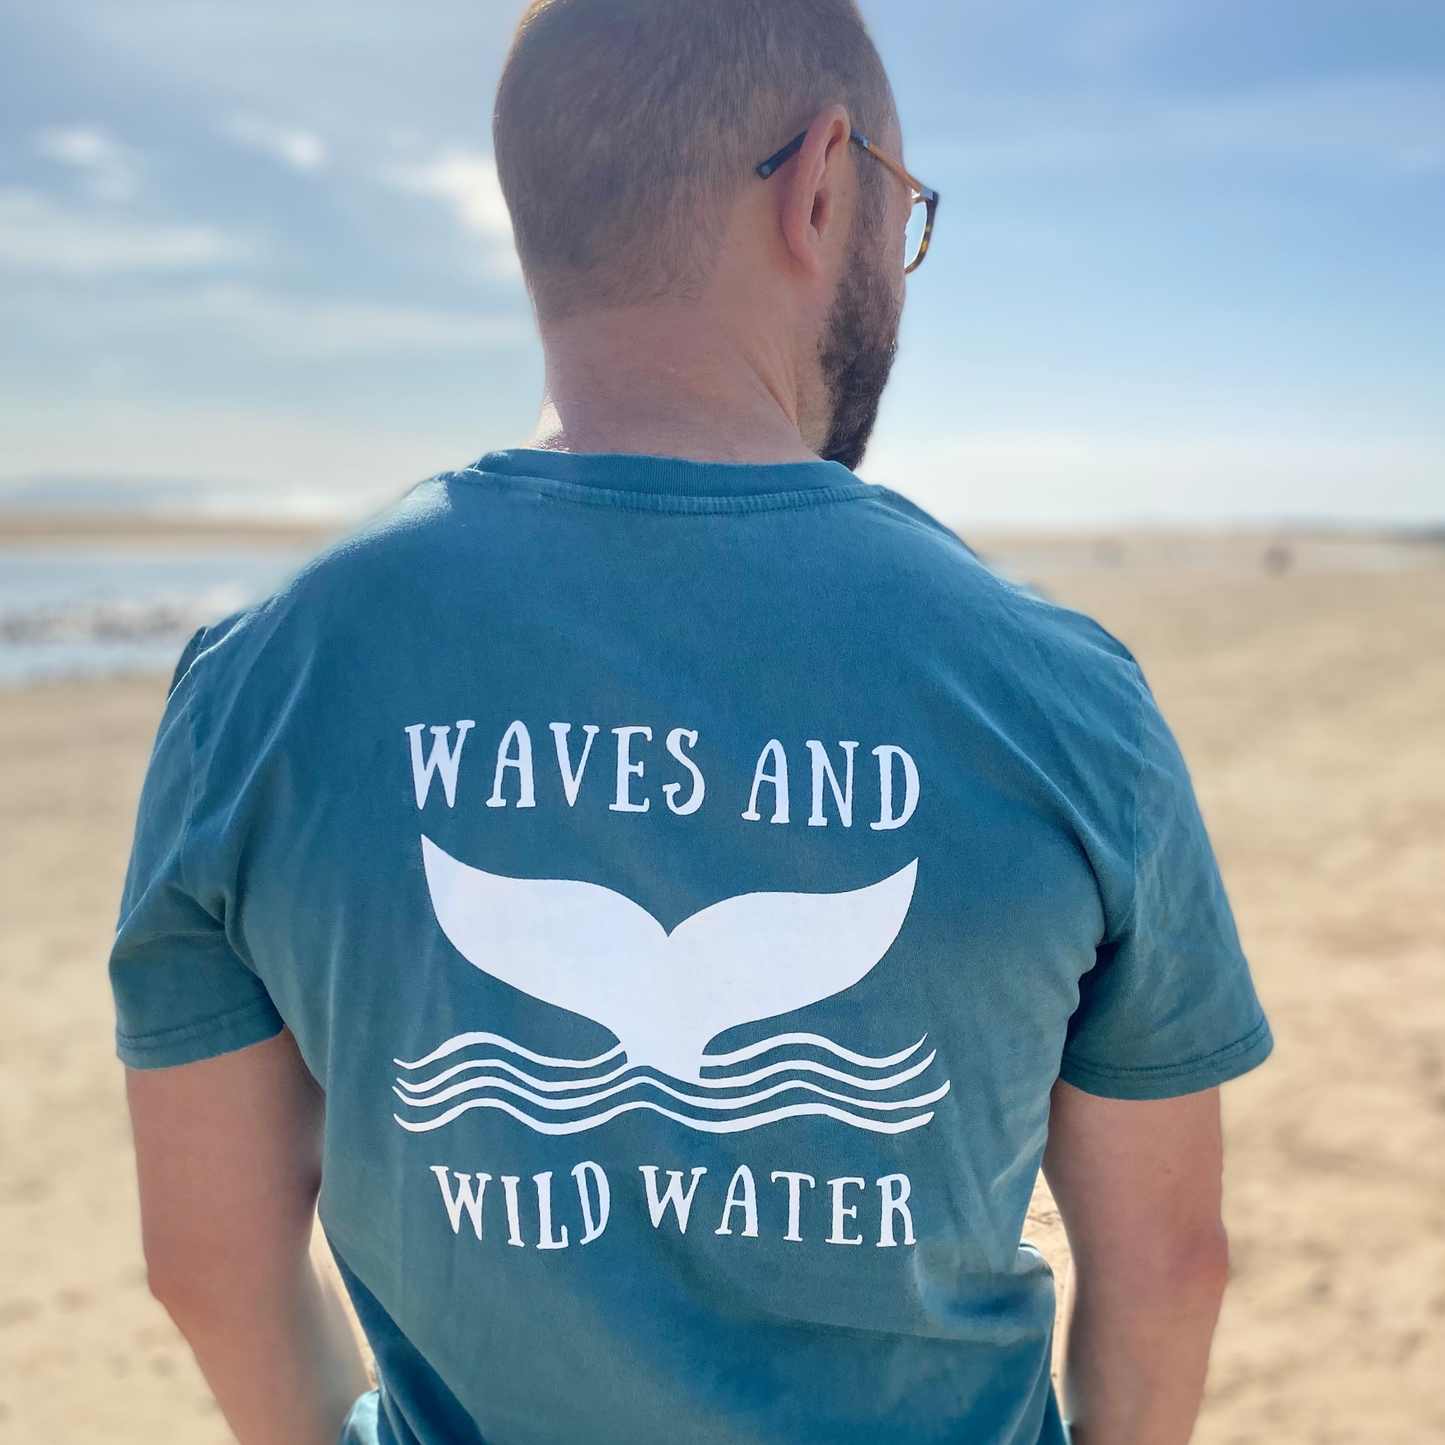 The back of a man wearing a green t-shirt with the Waves & Wild Water logo, depicting a whale tail coming out of waves, printed in white ink.